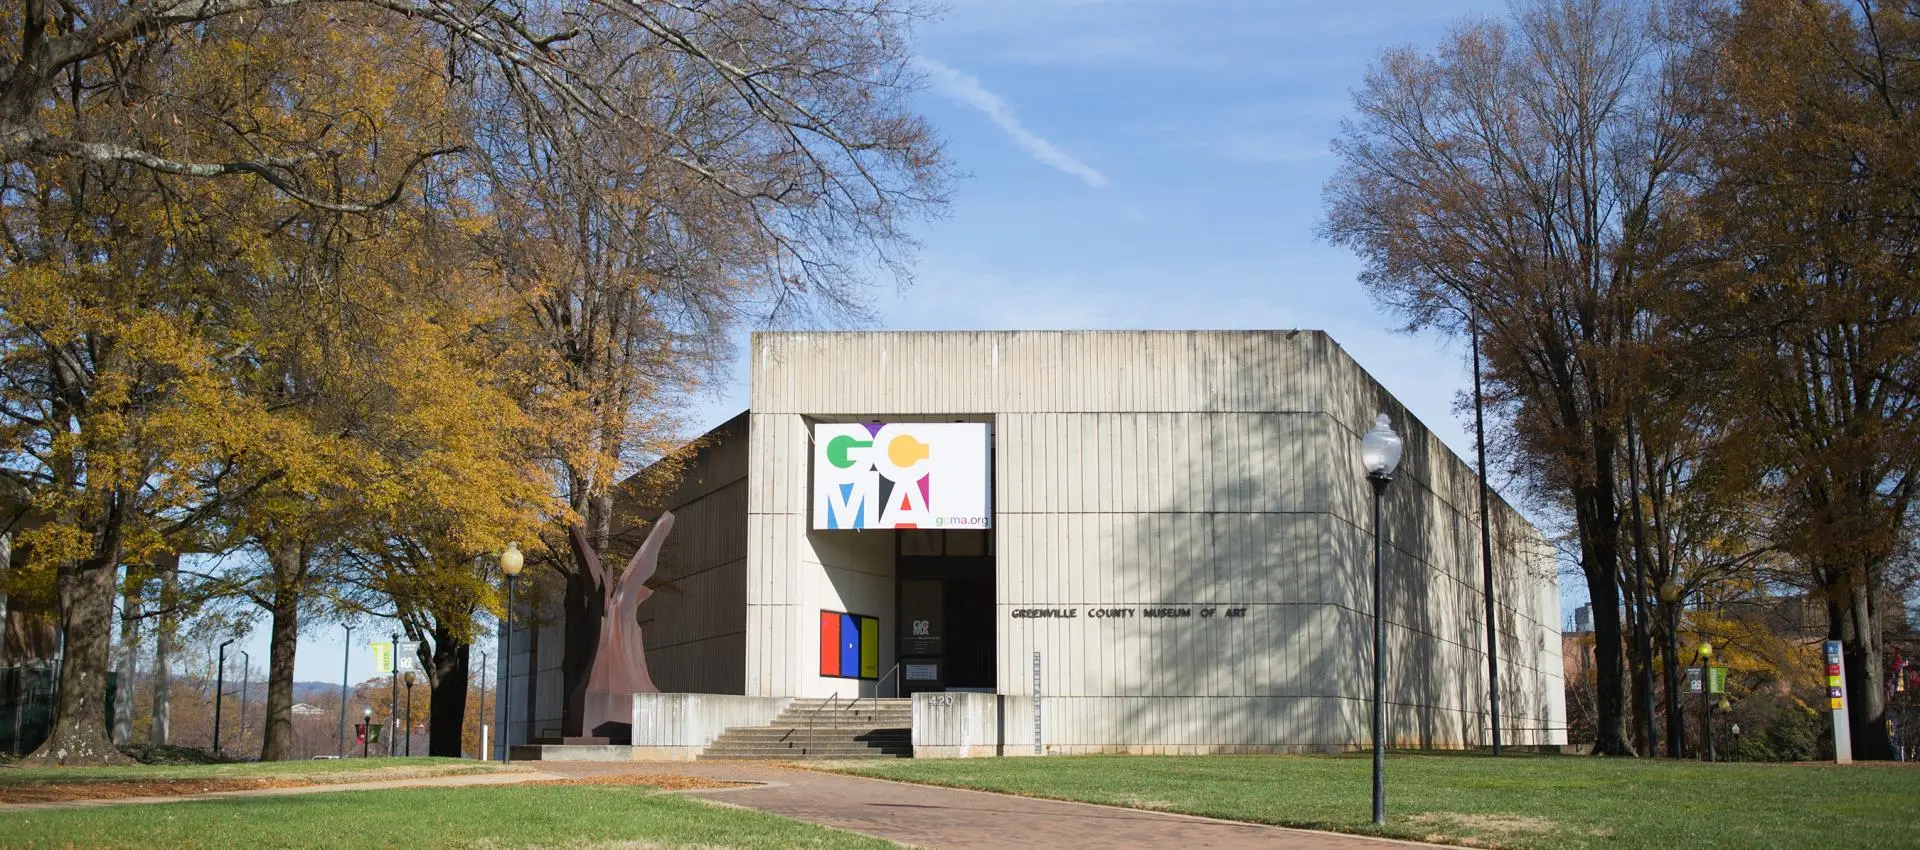 The Greenville County Museum of Art